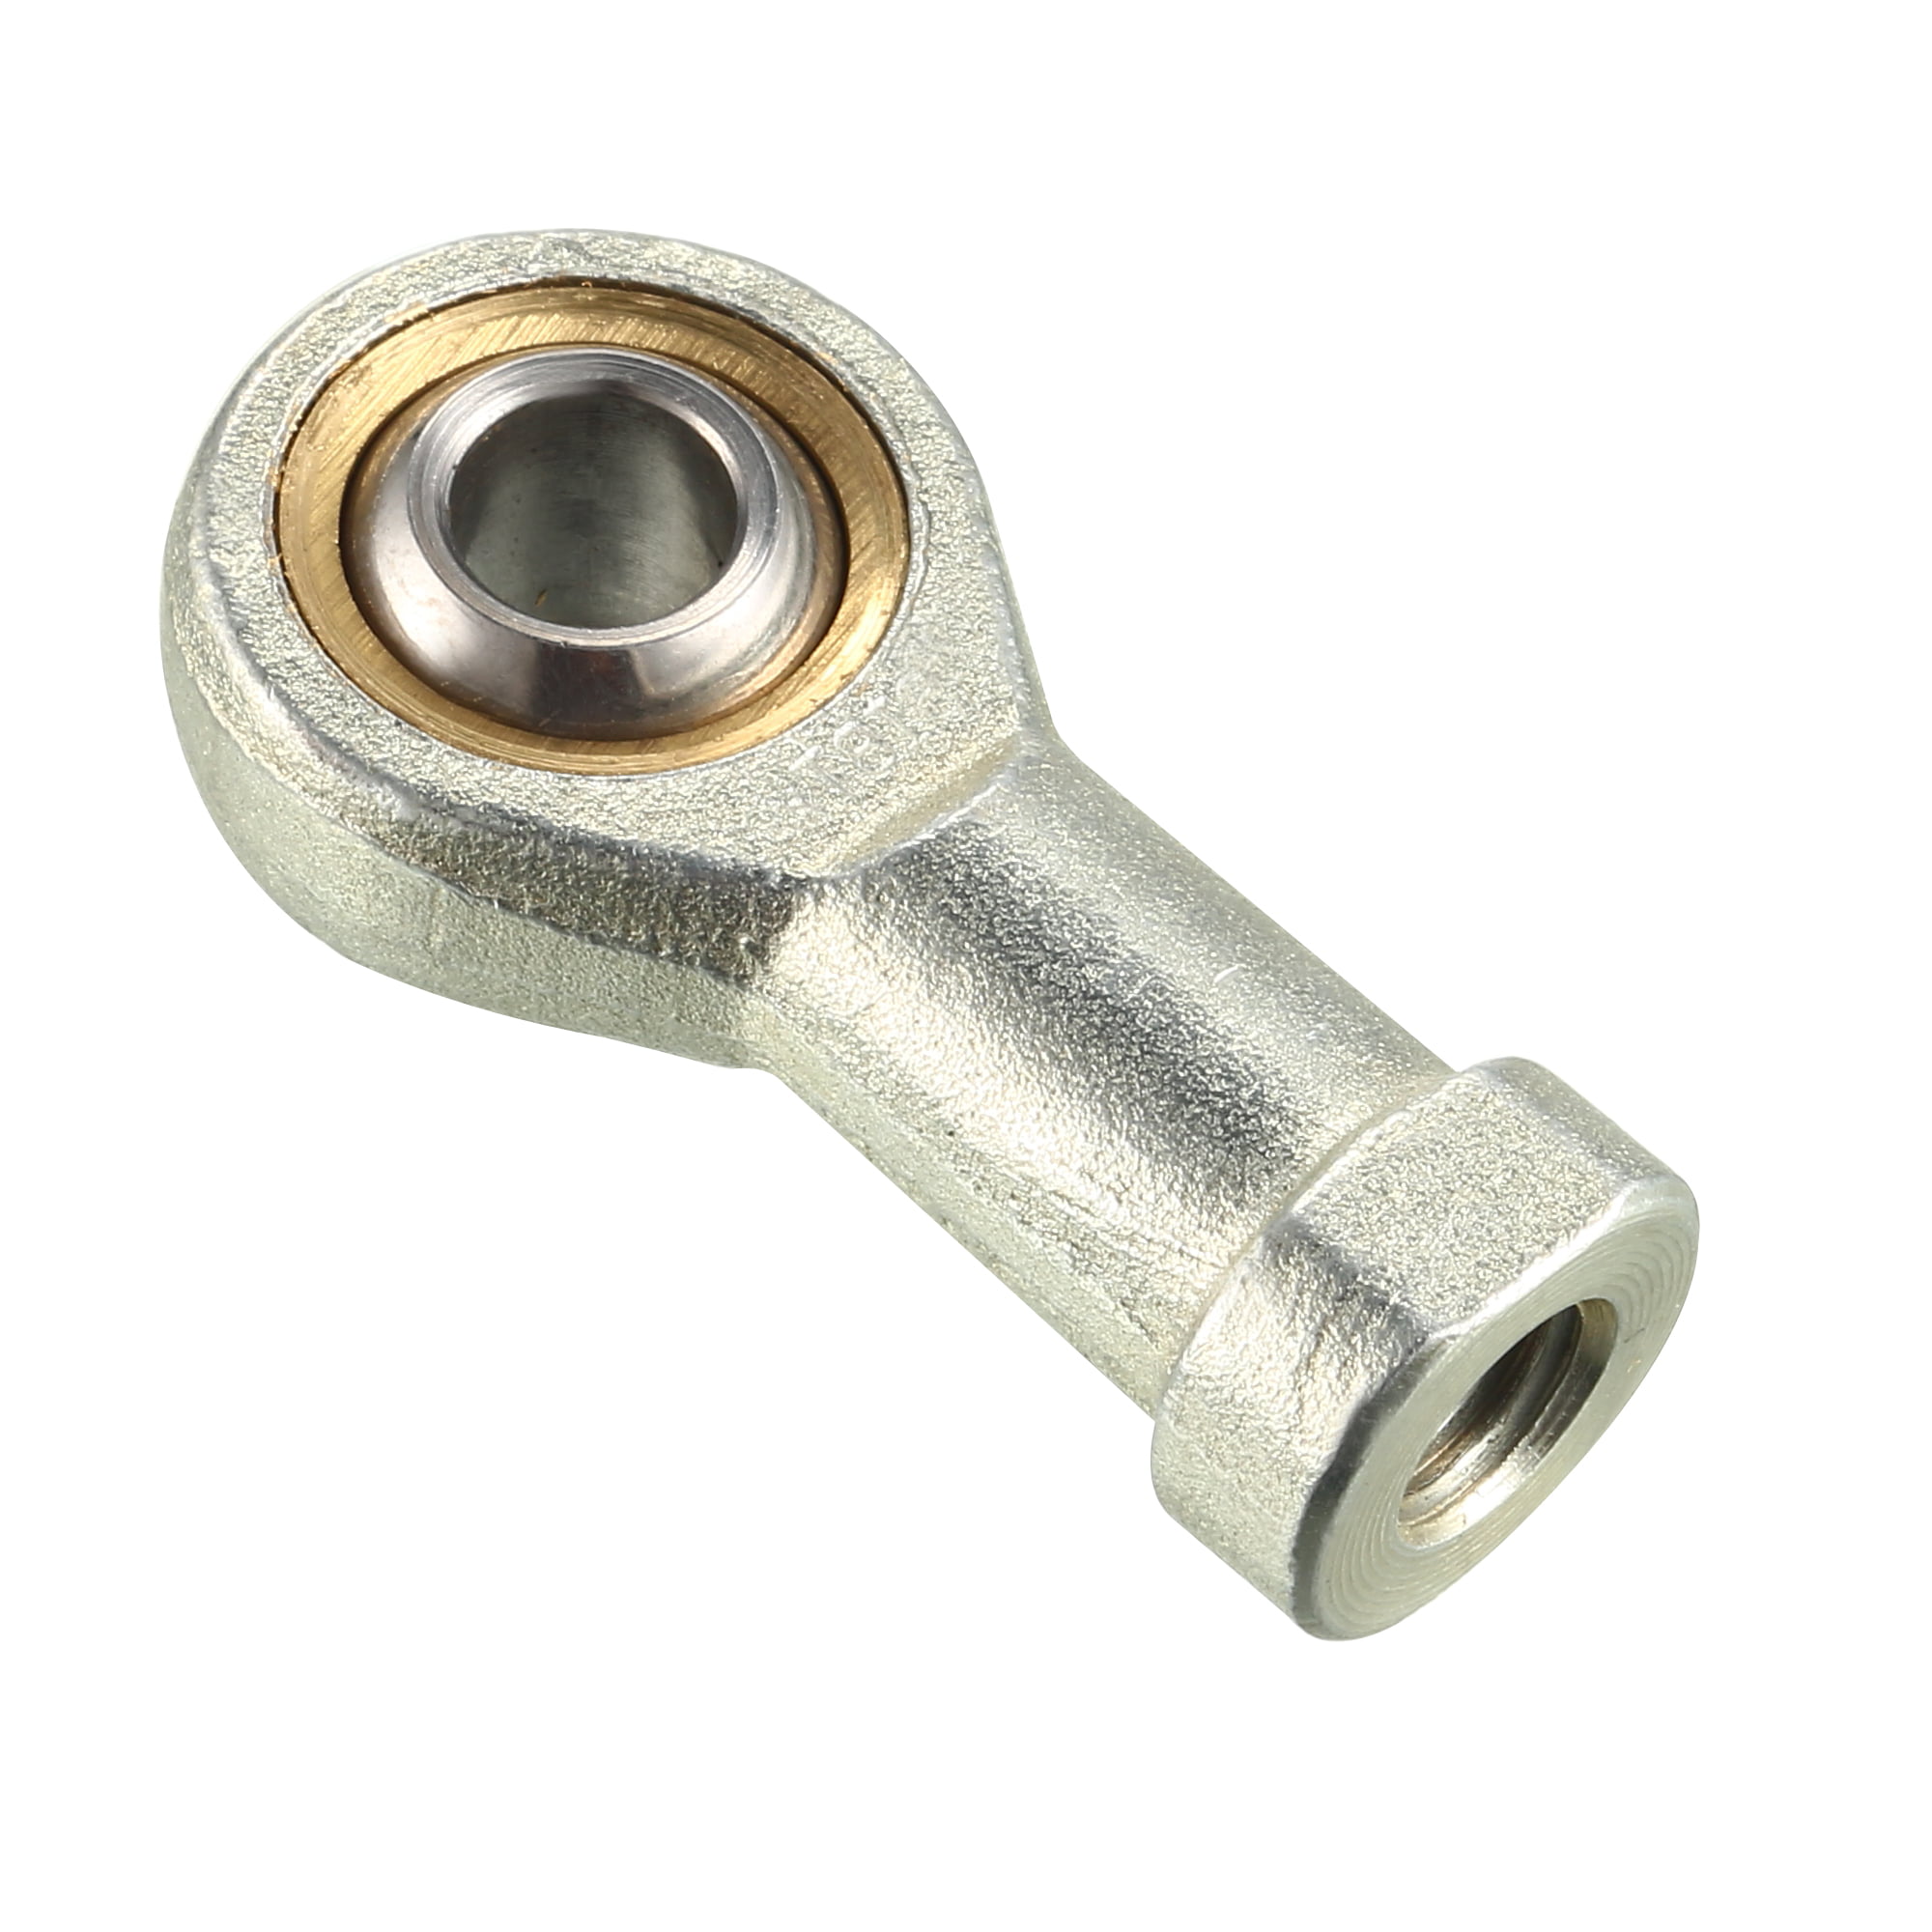 uxcell 12mm Rod End Bearing M12x1.75mm Rod Ends Ball Joint Female Right Hand Thread 2pcs 